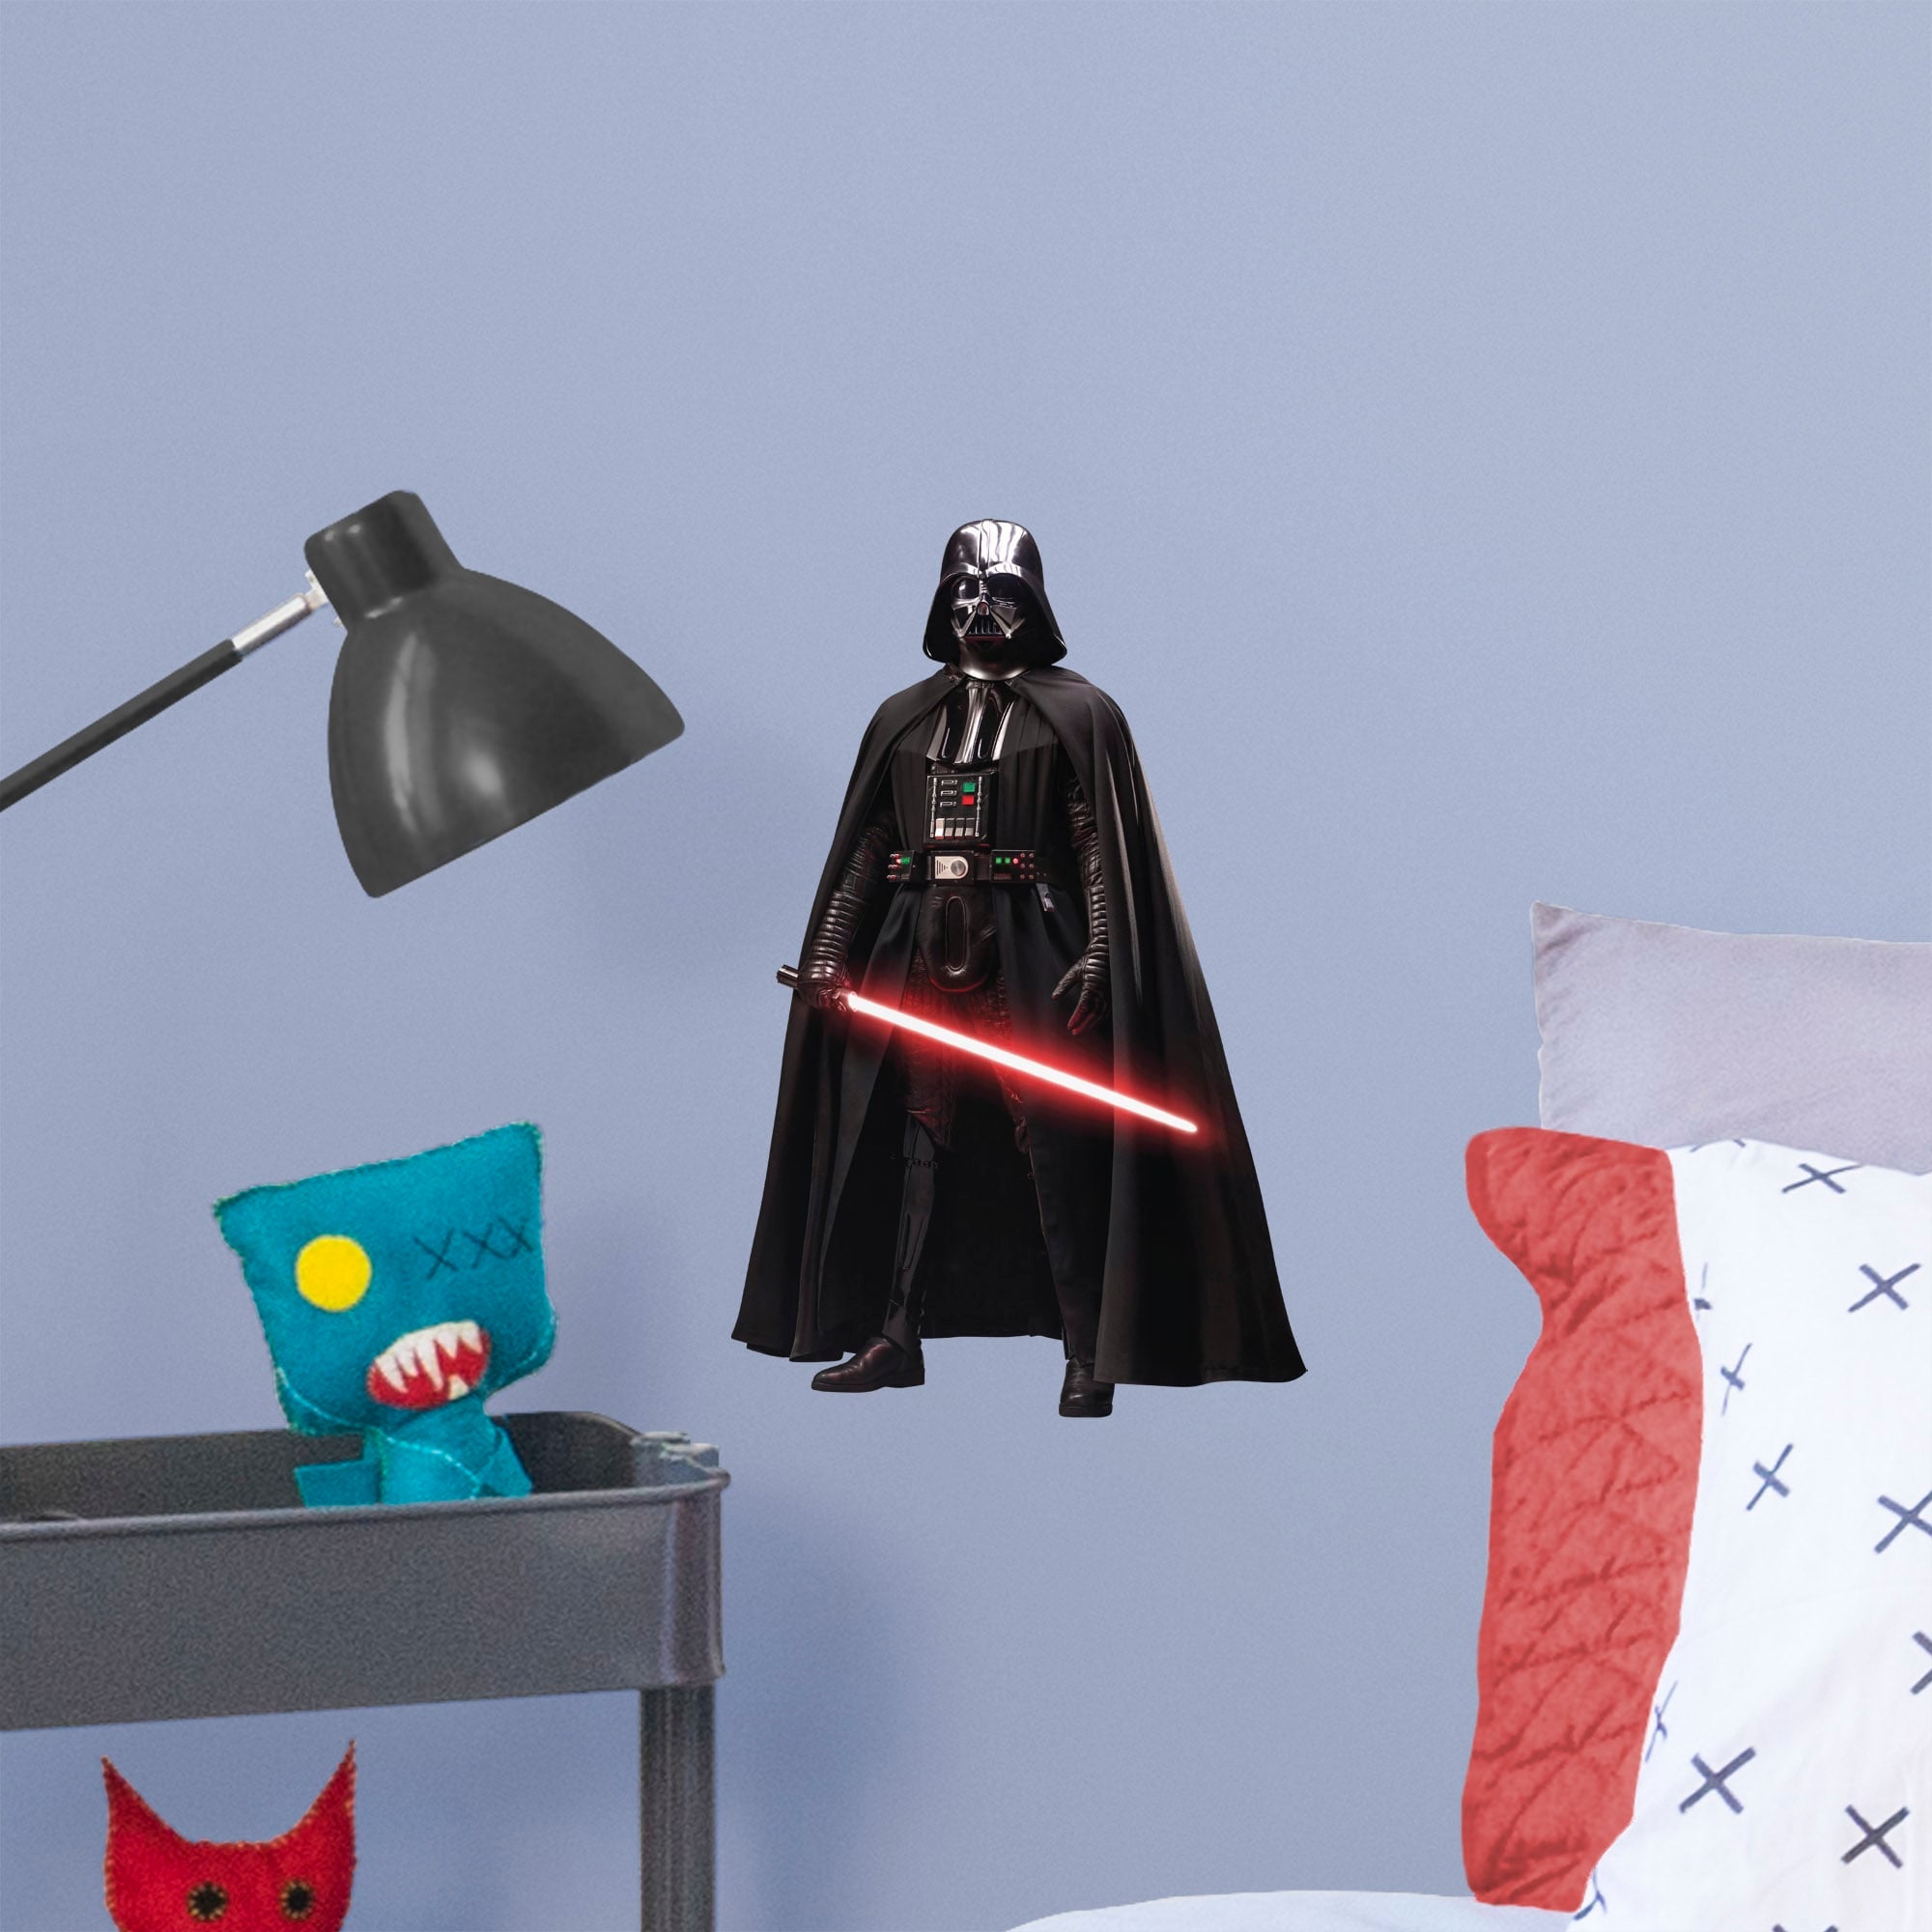 Darth Vader: Dark Lord of the Sith - Officially Licensed Removable Wall Decal Large by Fathead | Vinyl